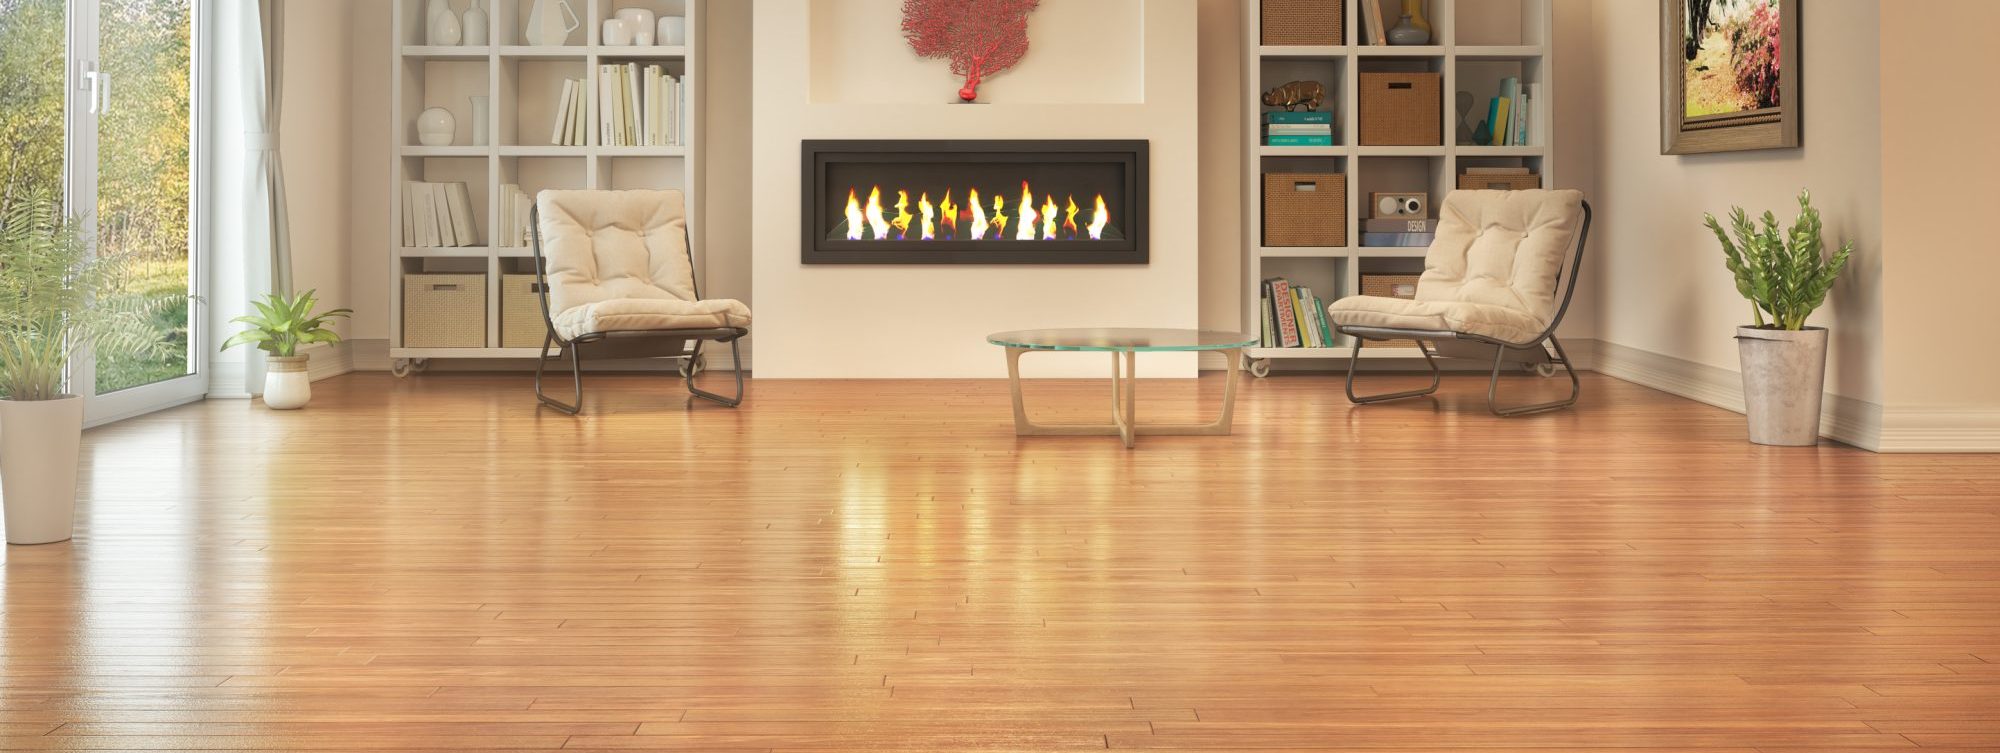 Living room with wooden floor and fireplace. 3d illustration